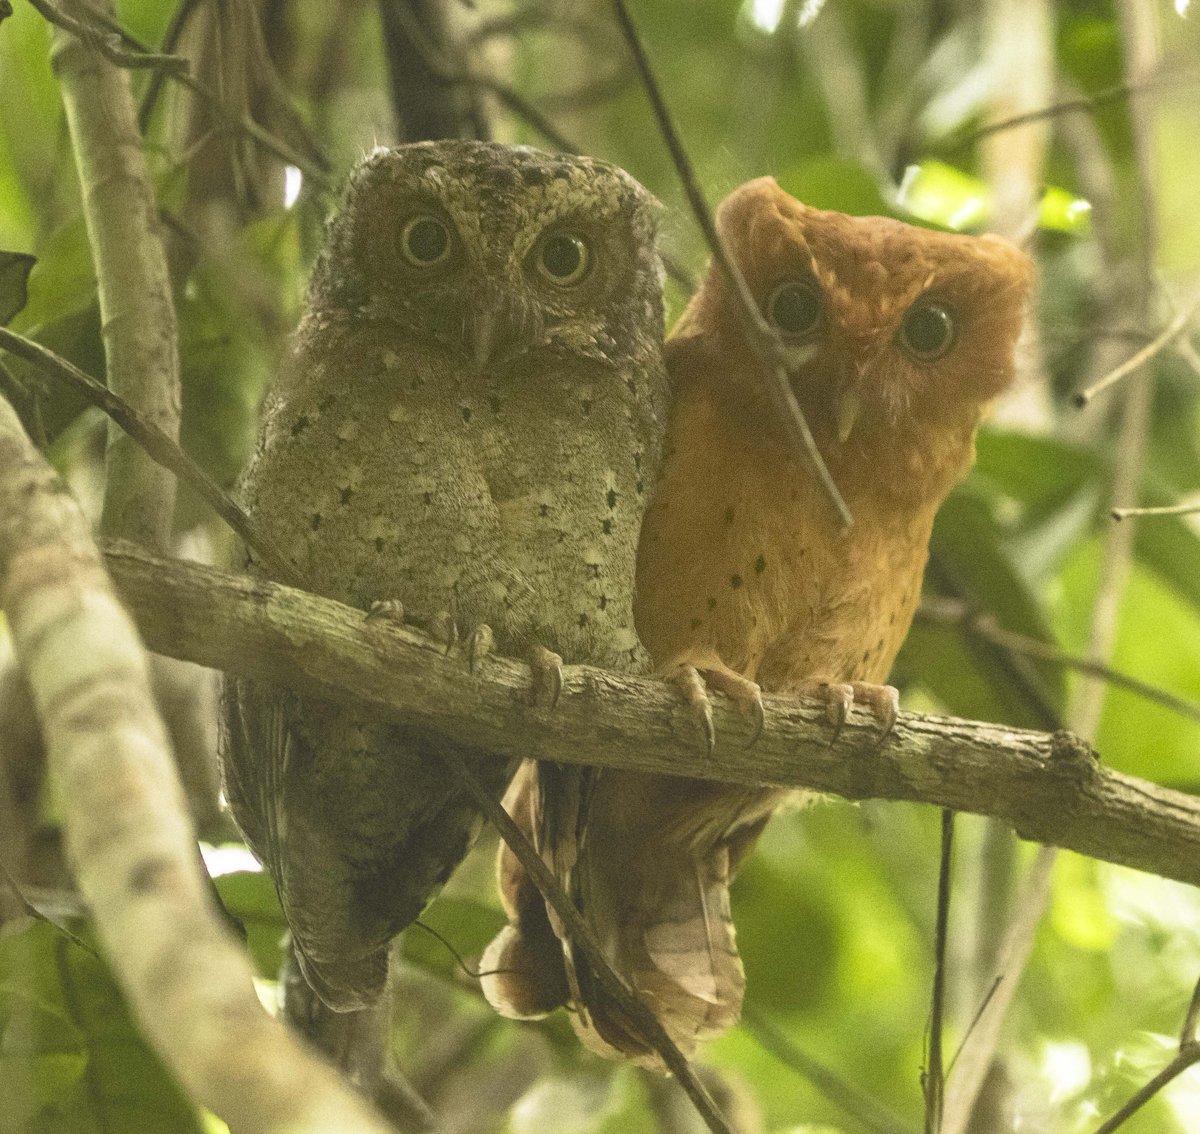 The Sokoke Scops Owl holds a special place among my favorite owls, residing in the Arabuko-Sokoke Forest along the East African Coast.